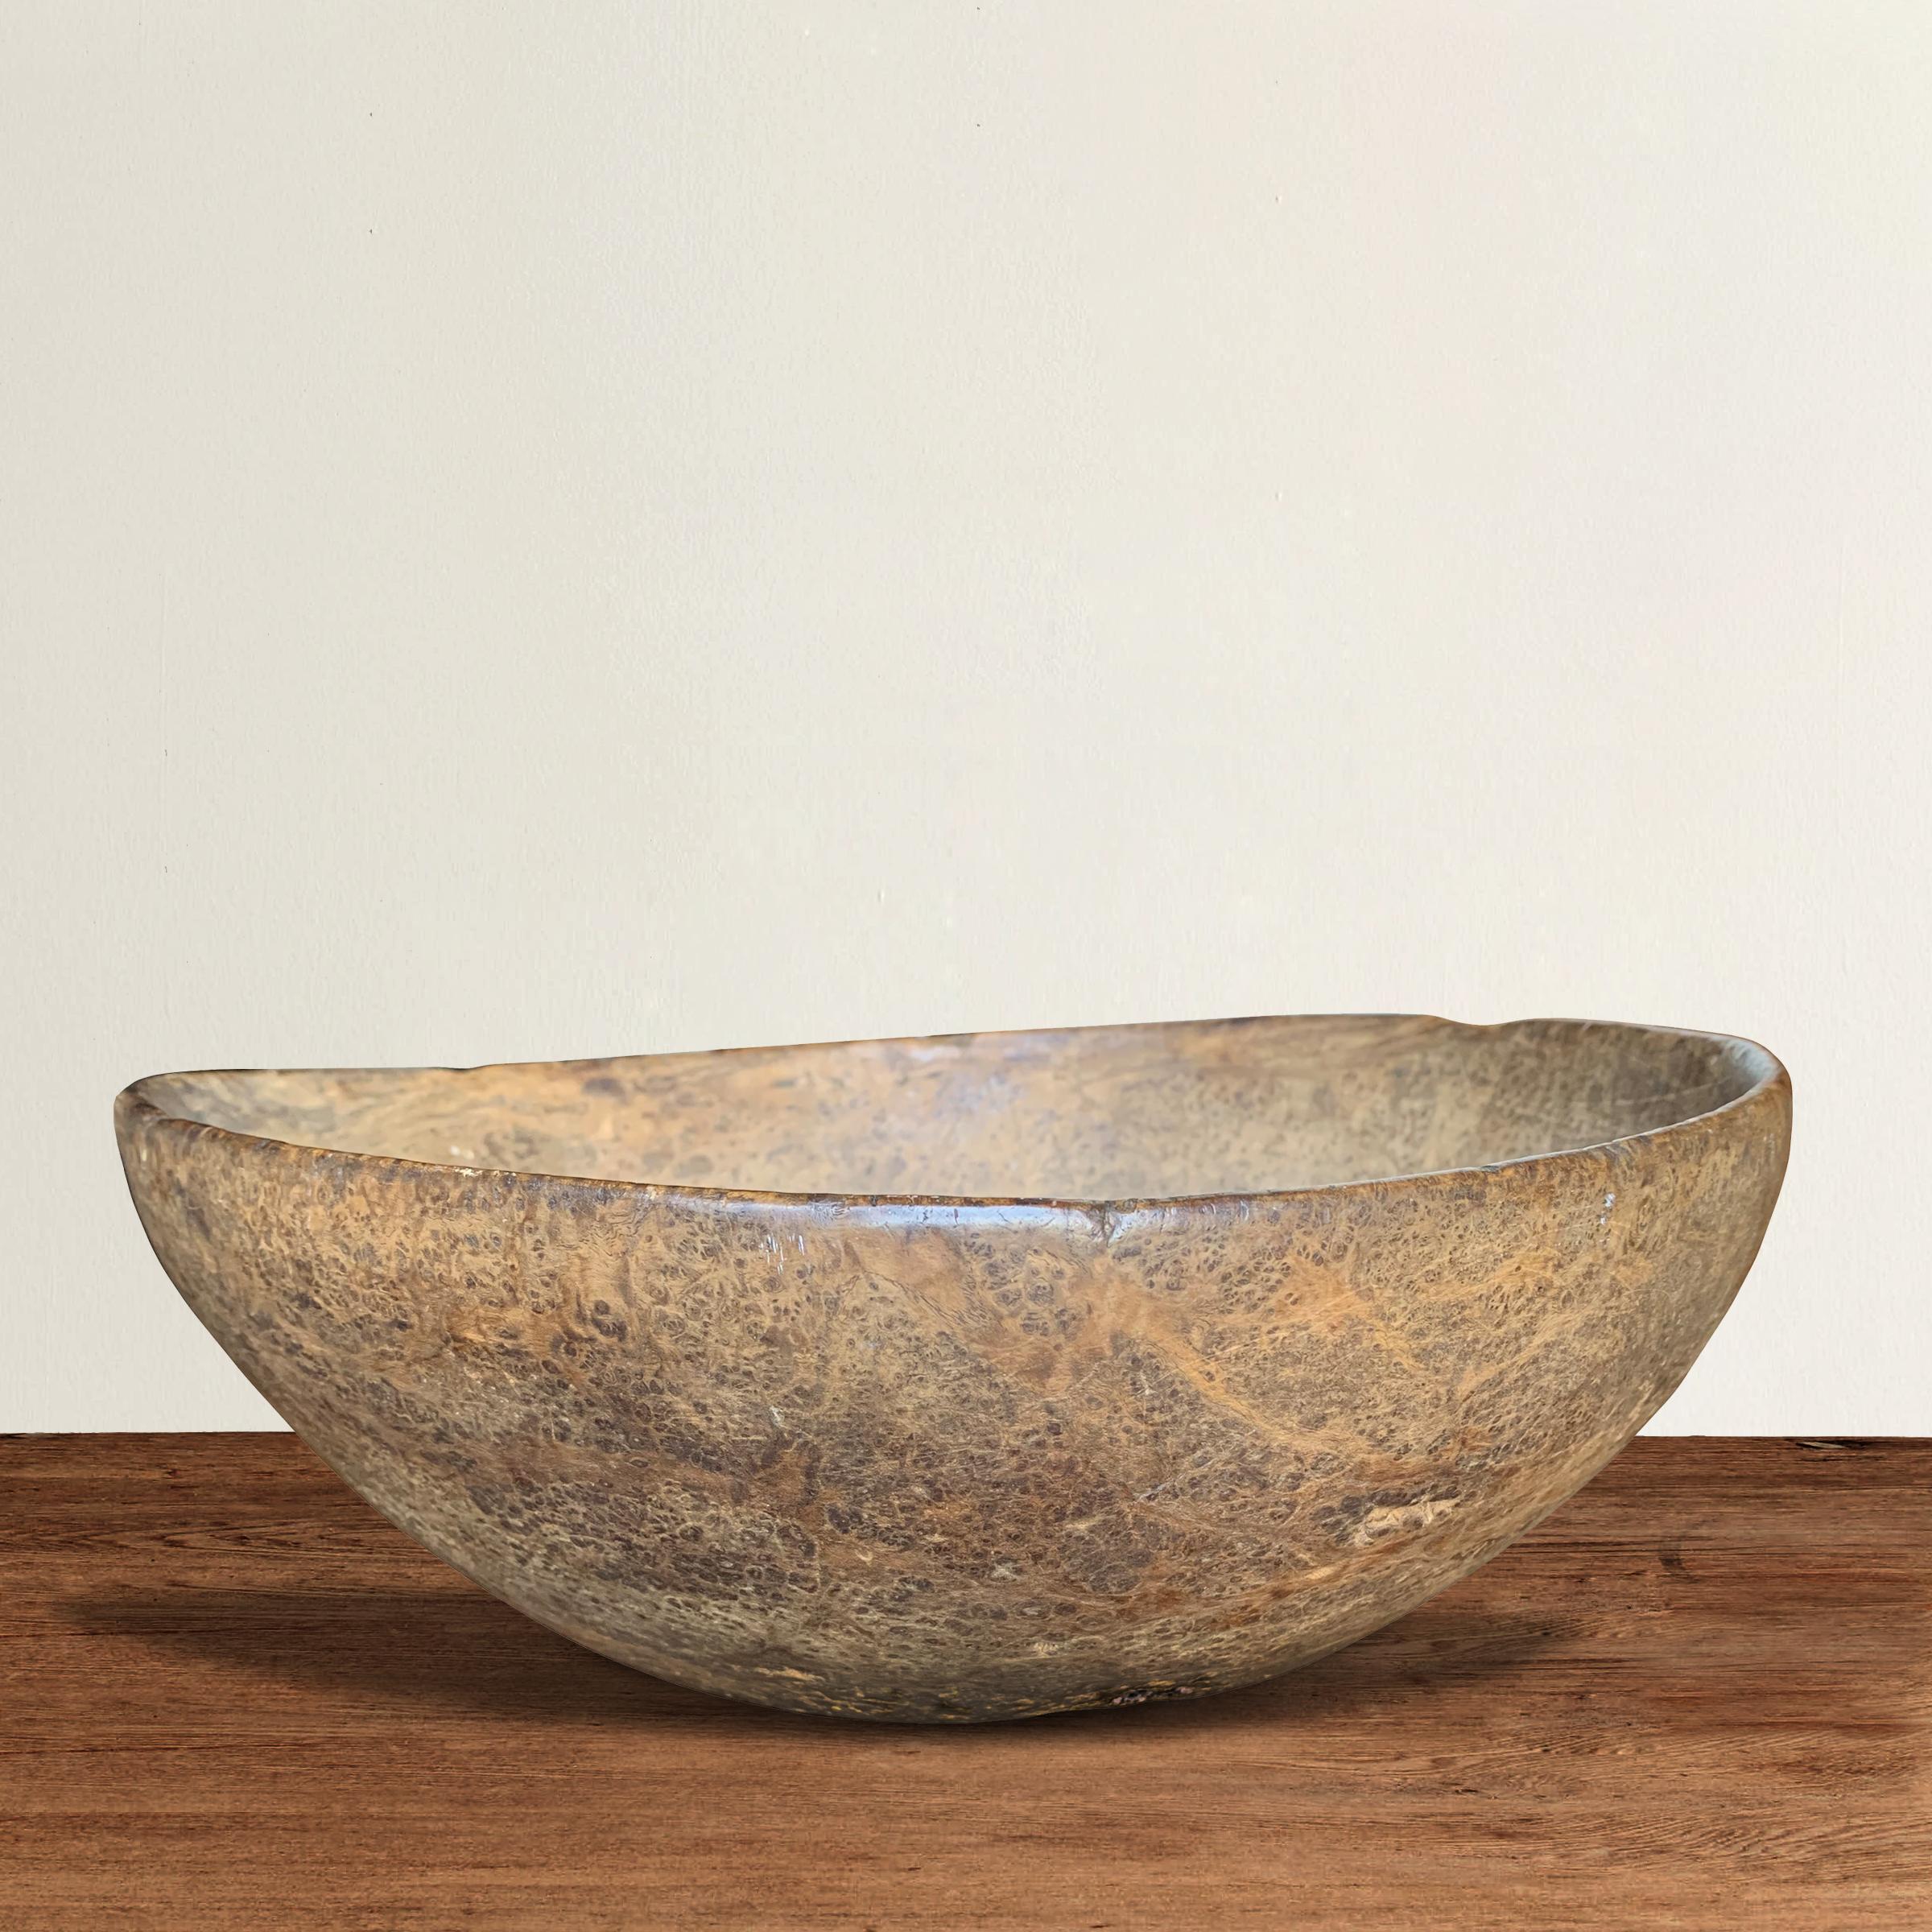 An incredible 18th century early American ash burl bowl from New England, probably New York, with an extraordinary tight burl grain pattern and a smooth surface with a well-worn patina, the result of over two centuries of use.